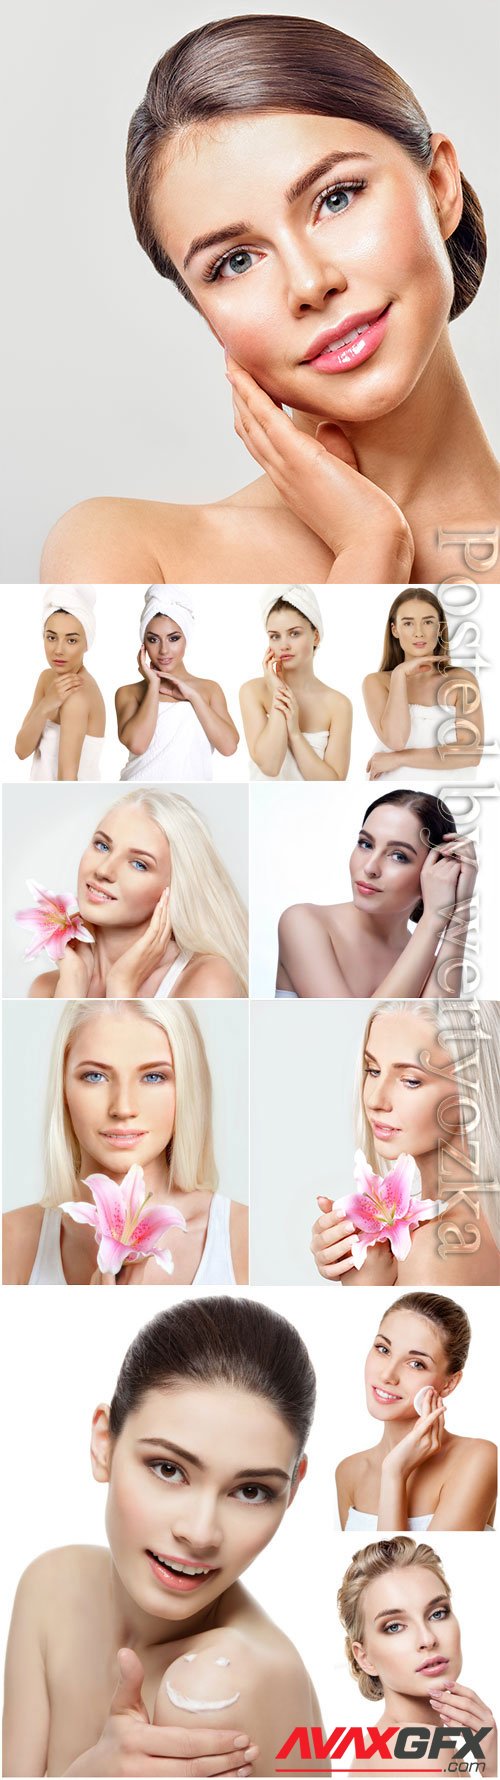 Healthy well-groomed skin of women face stock photo